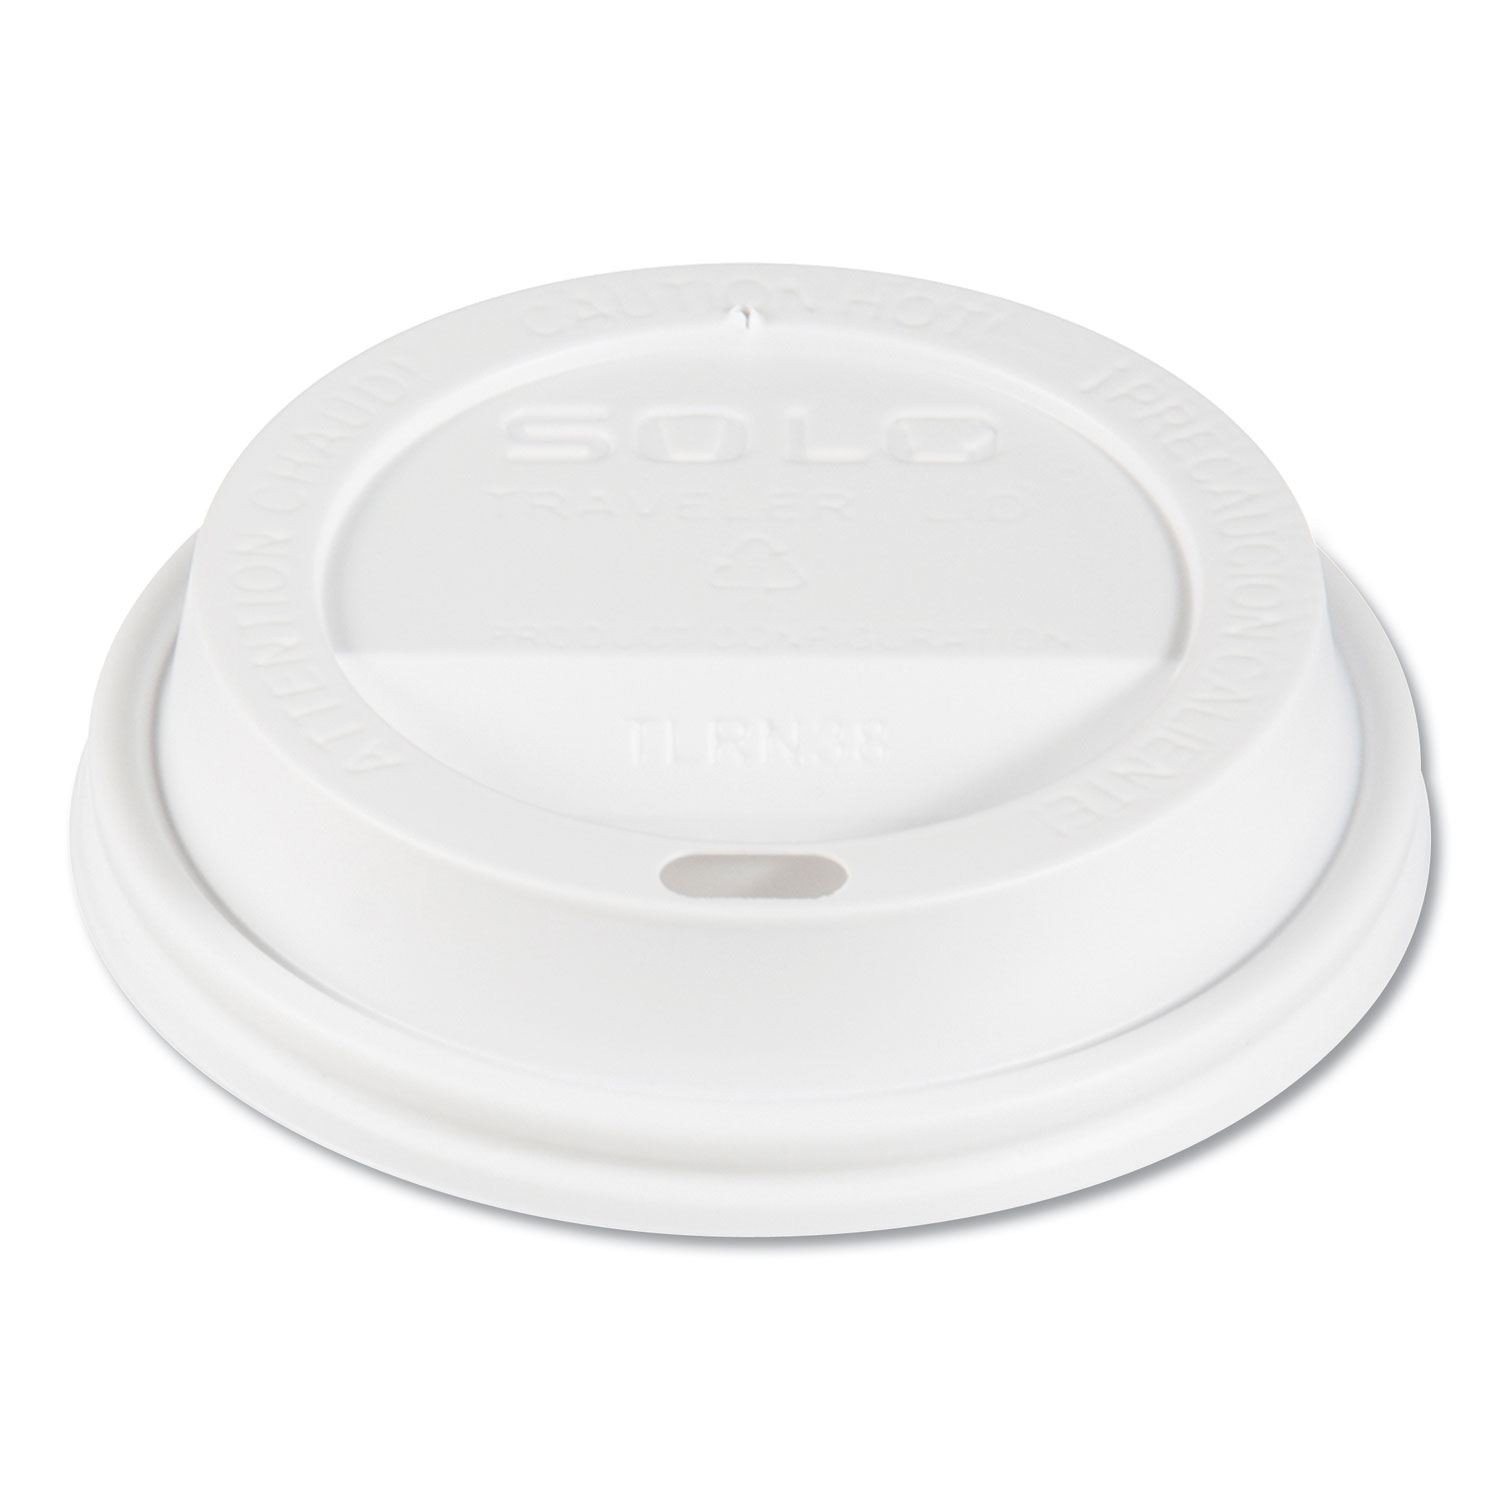  Dart TL31R2-0007 Traveler Cappuccino Style Dome Lid, Fits 10oz Cups, White, 100/Pack, 10 Packs/Carton (SCCTL31R2) 